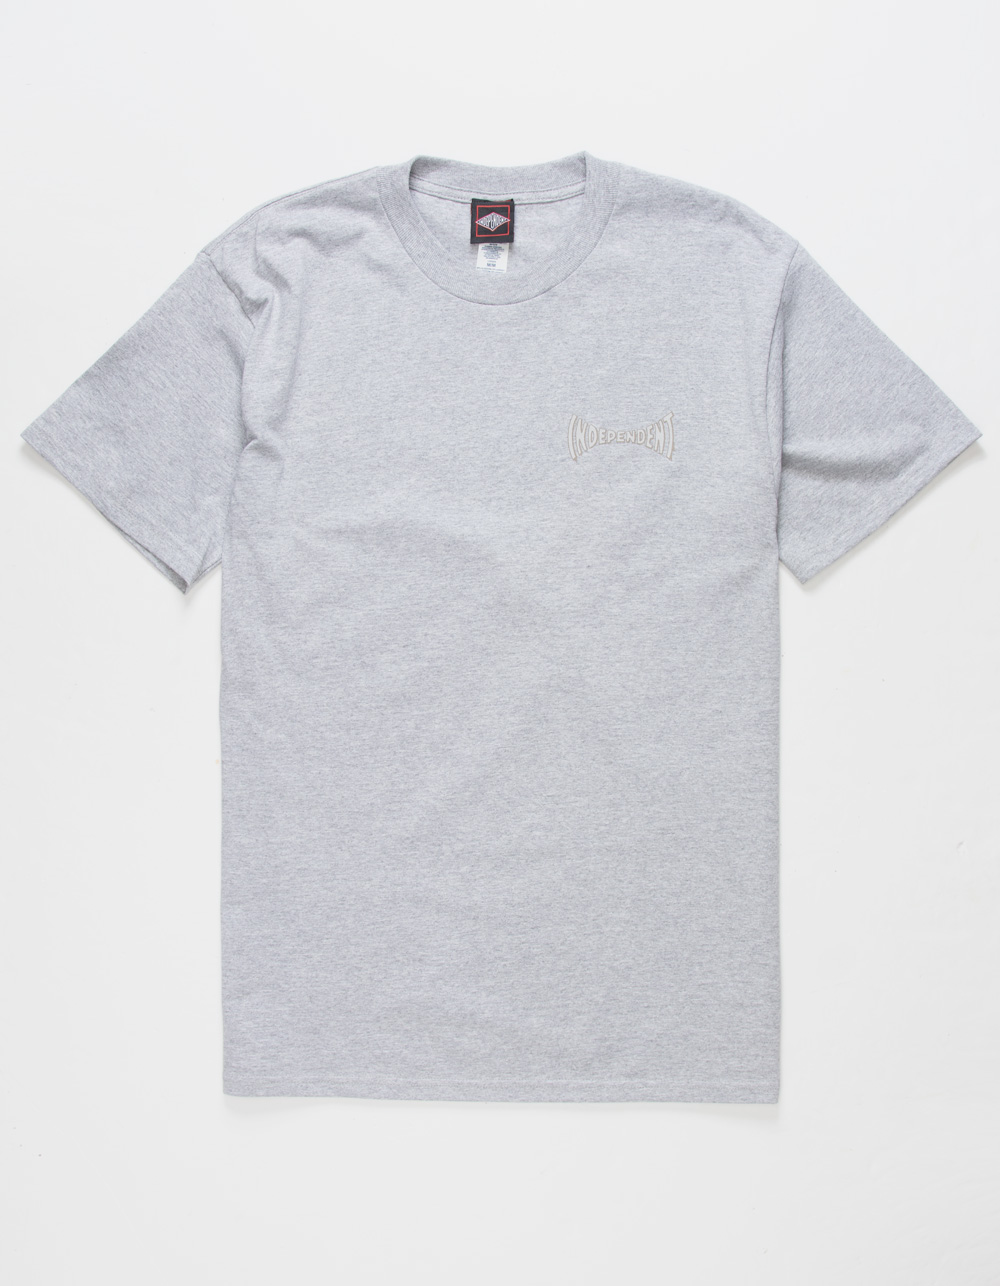 INDEPENDENT Built To Grind Mens Tee - HEATHER GRAY | Tillys